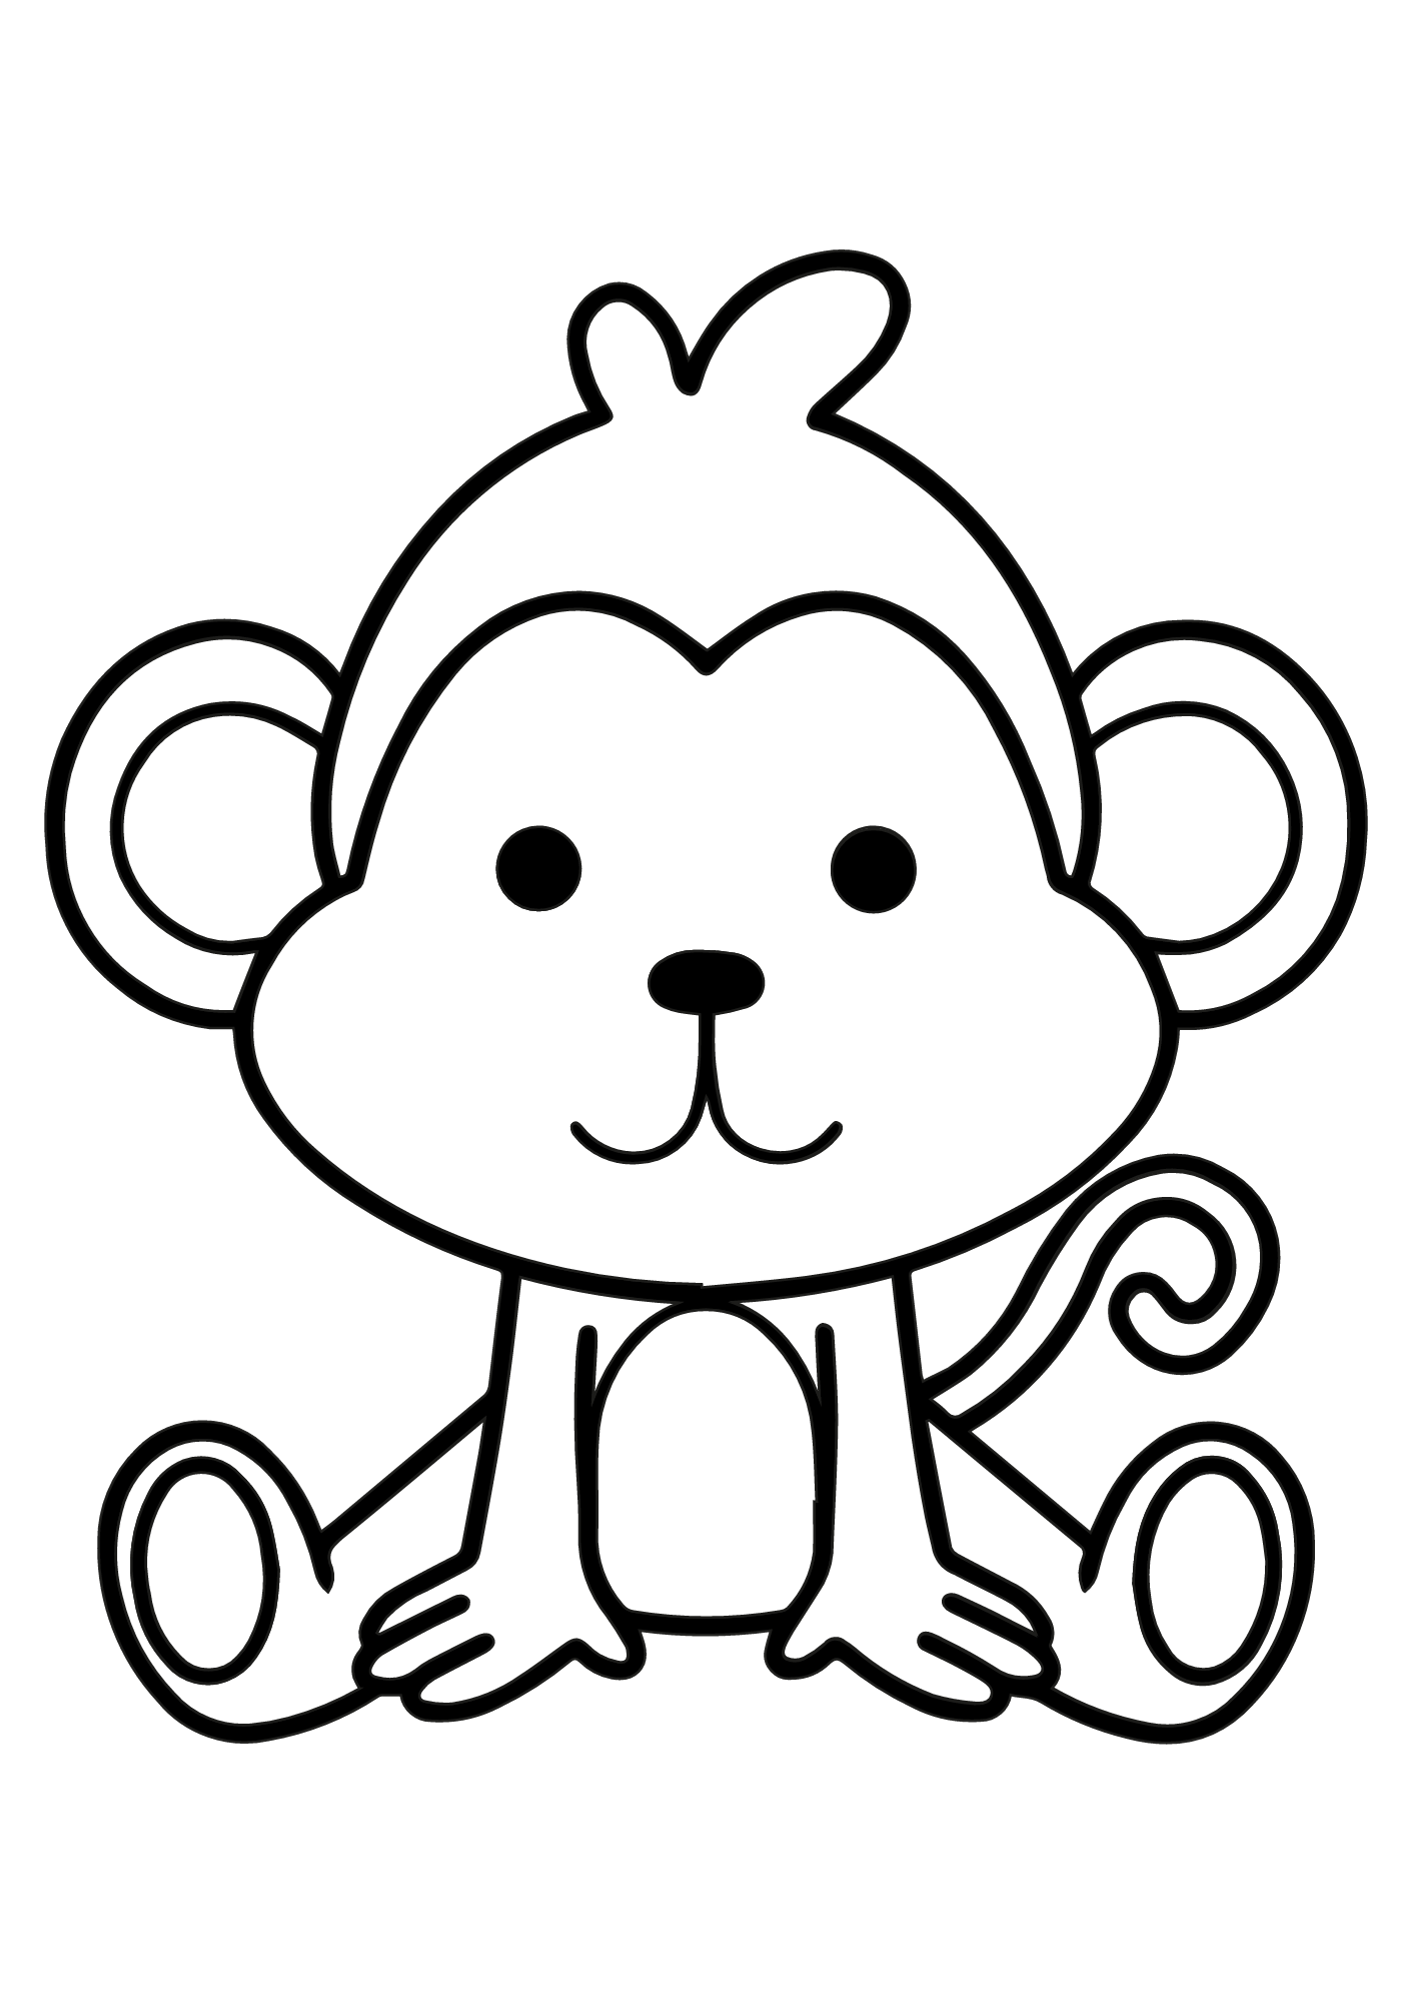 Monkey For Children Coloring Page